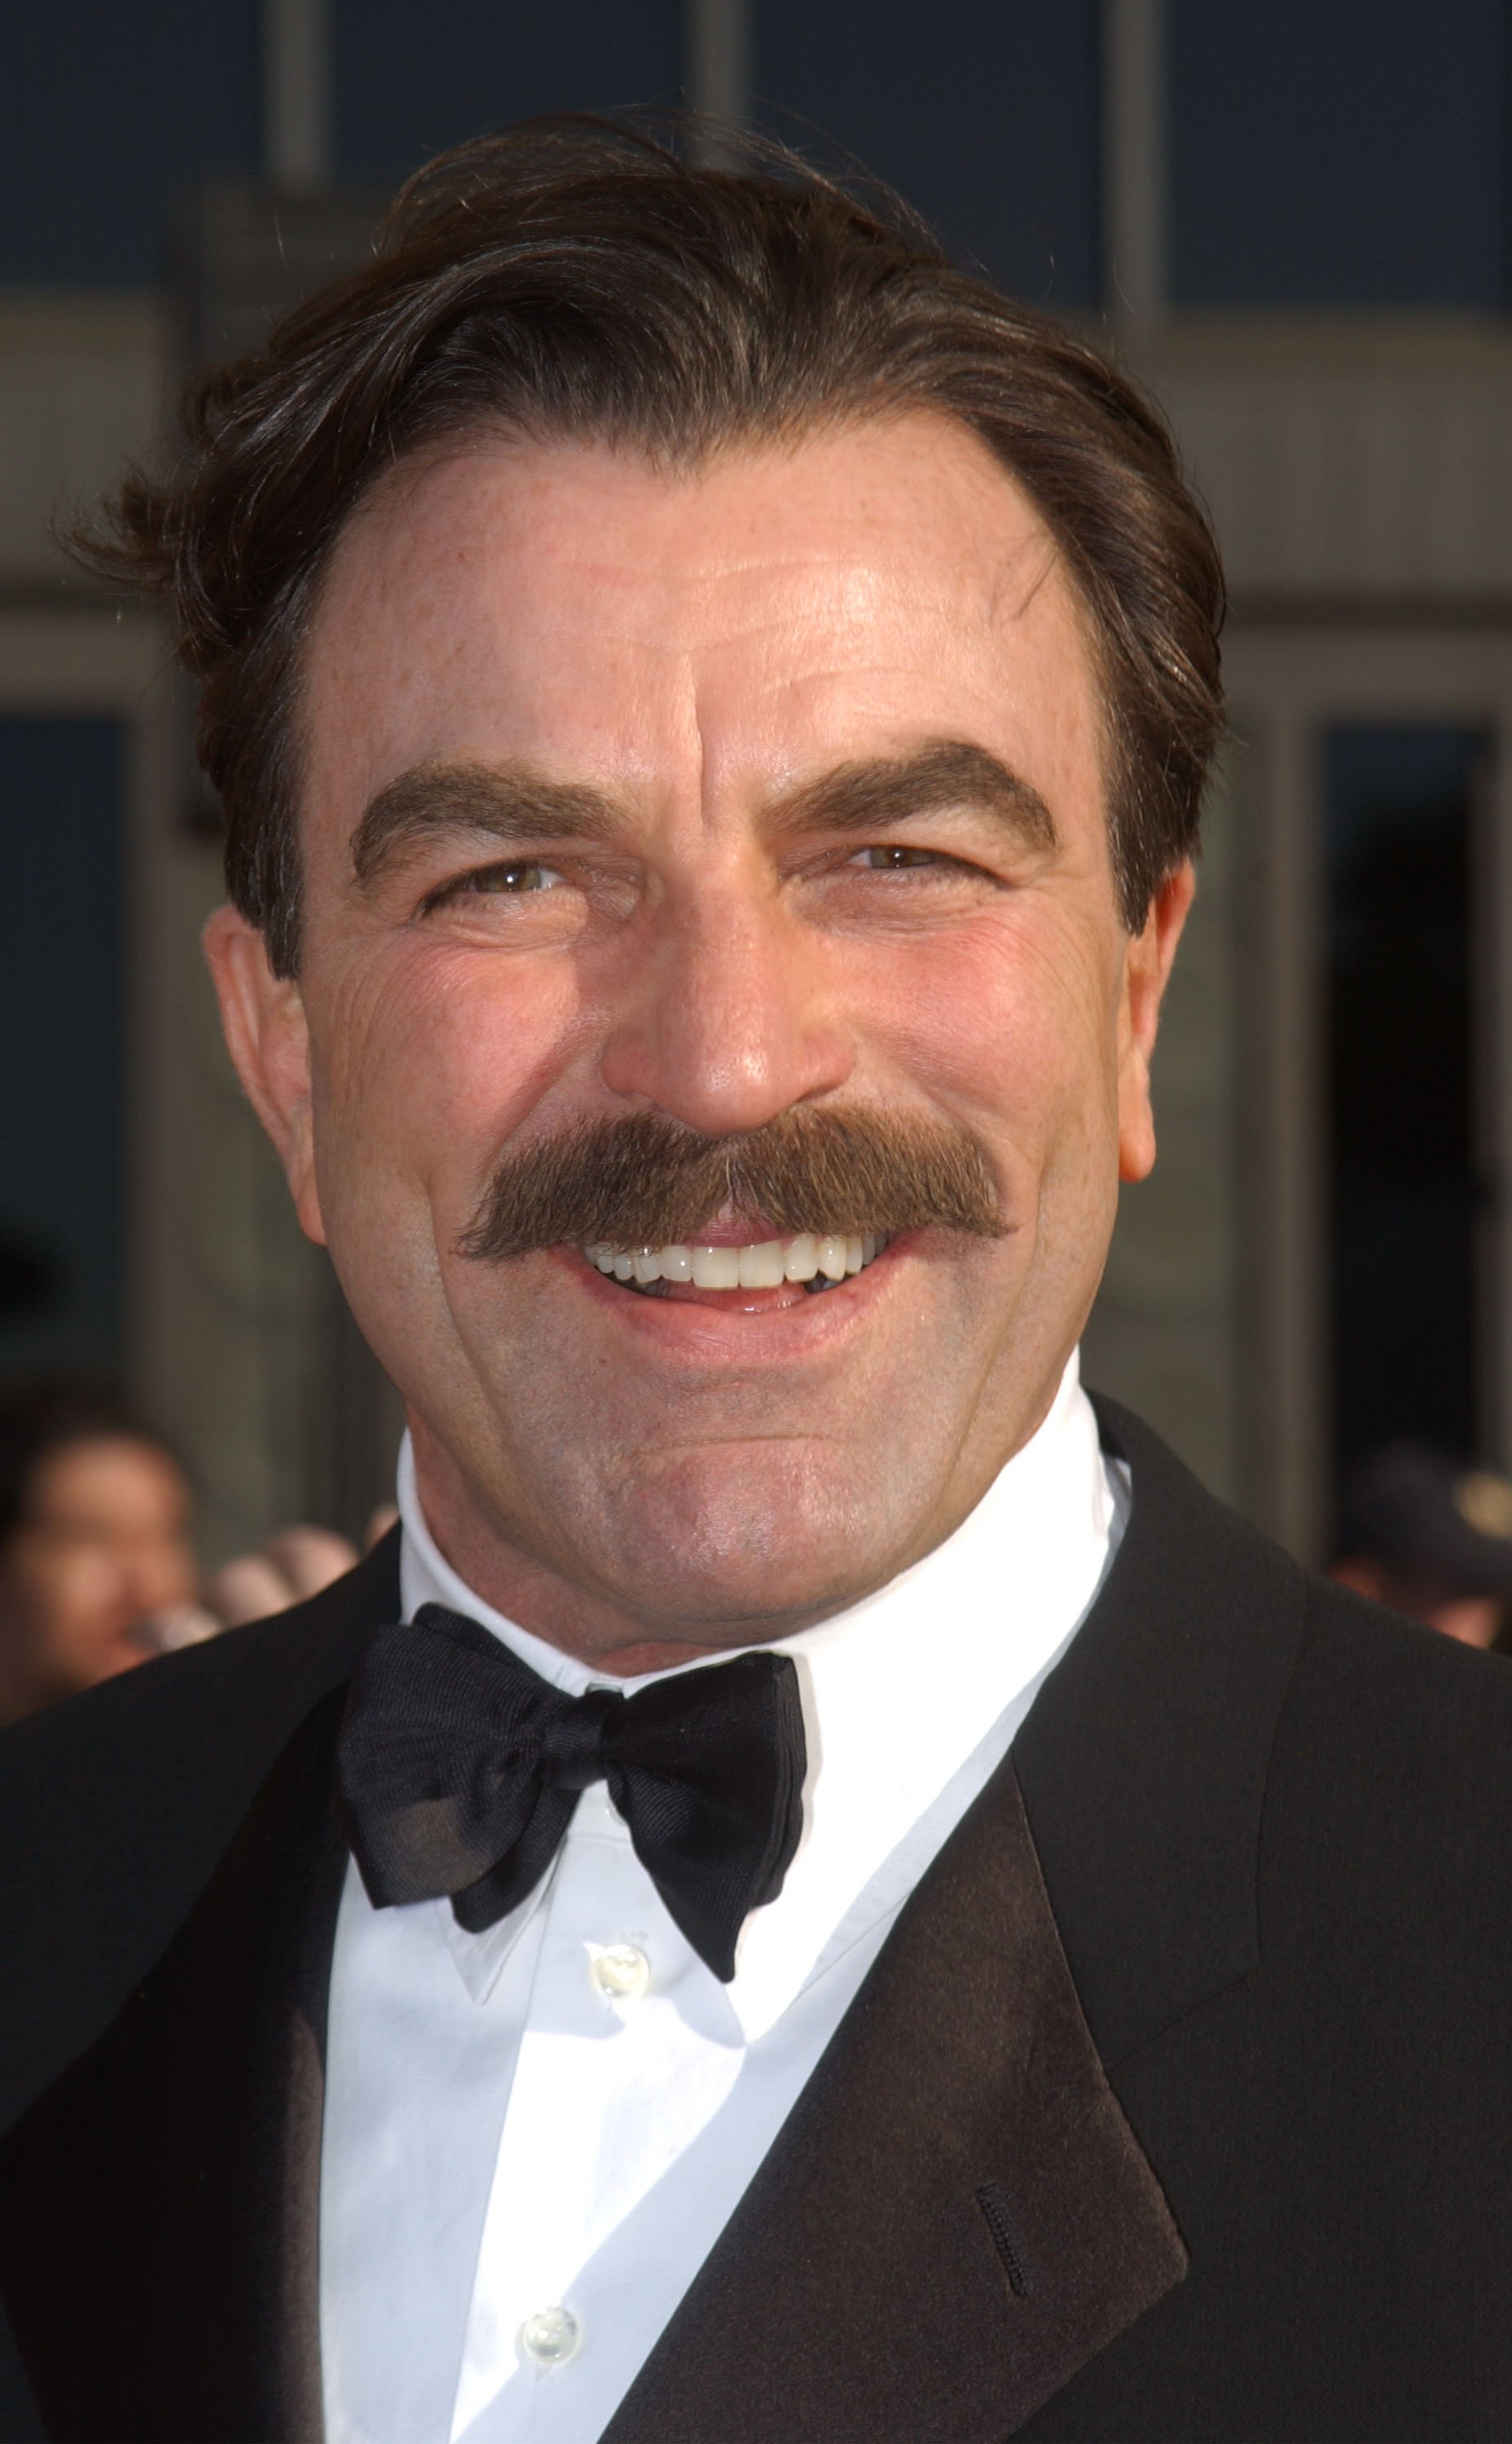 Tom Selleck attends the 8th Annual Screen Actors Guild Awards on March 10, 2002 | Photo: GettyImages